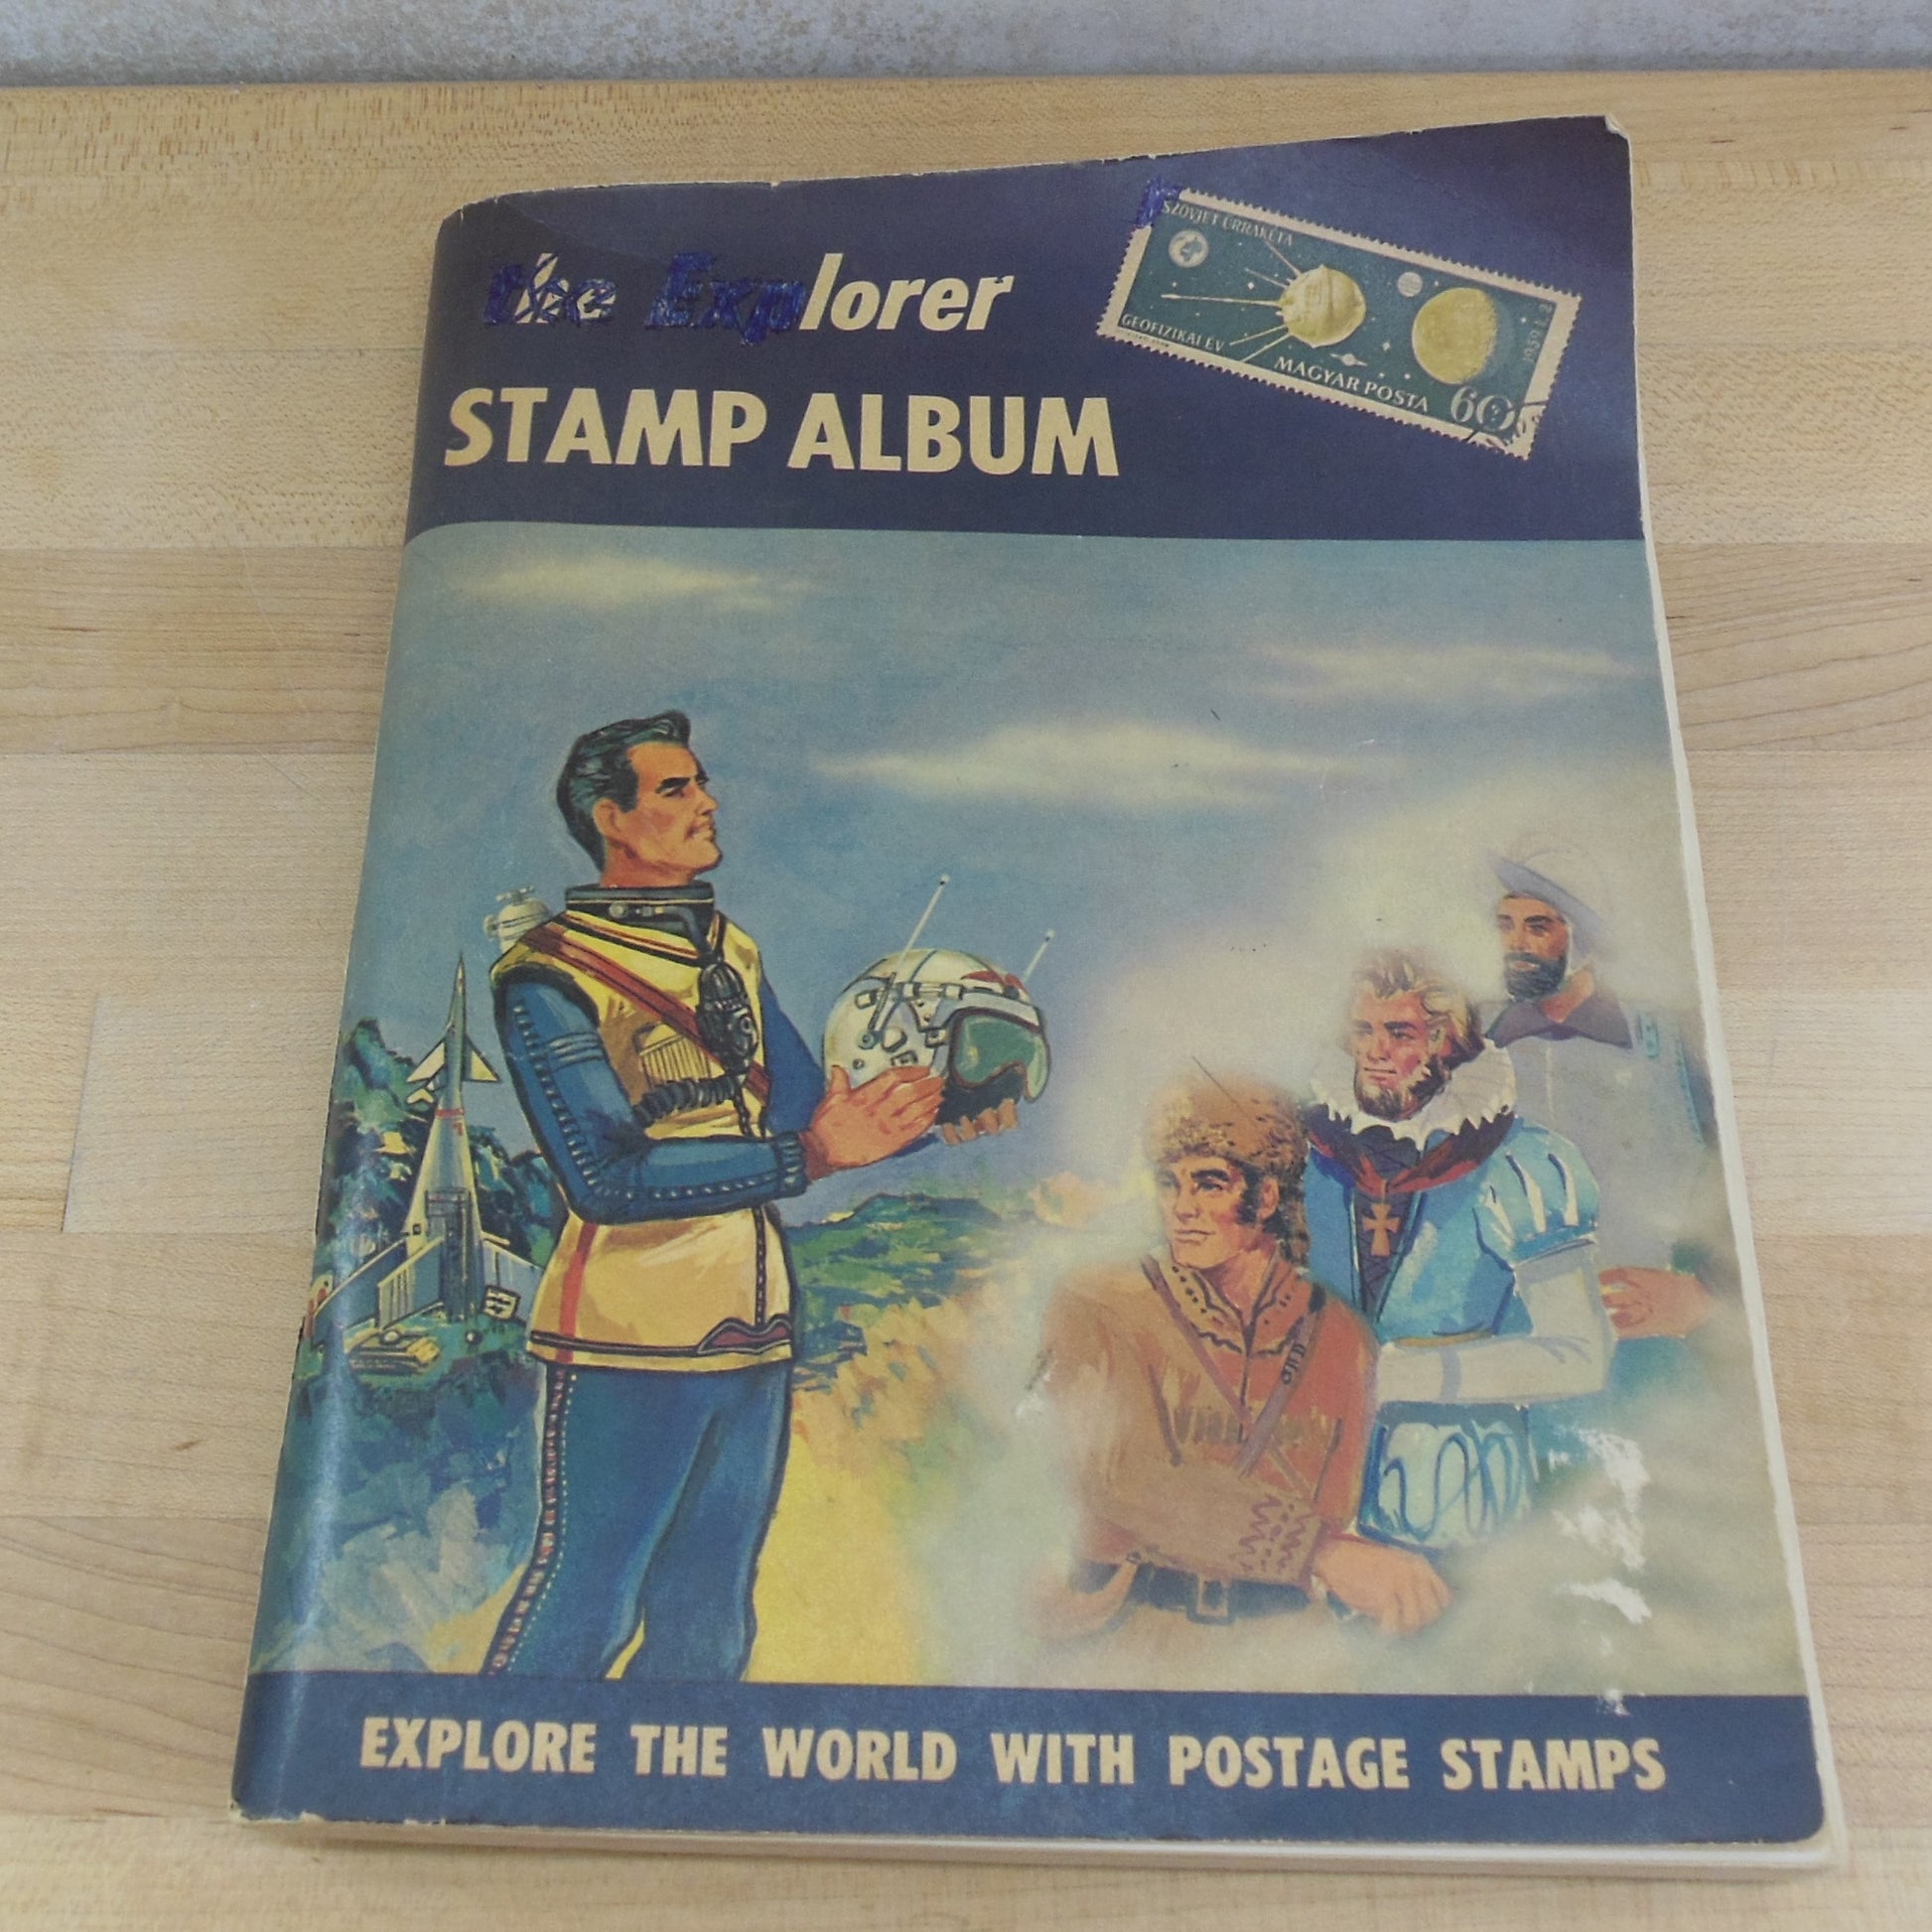 I just bought a stamp collection book from the 1930s that is full